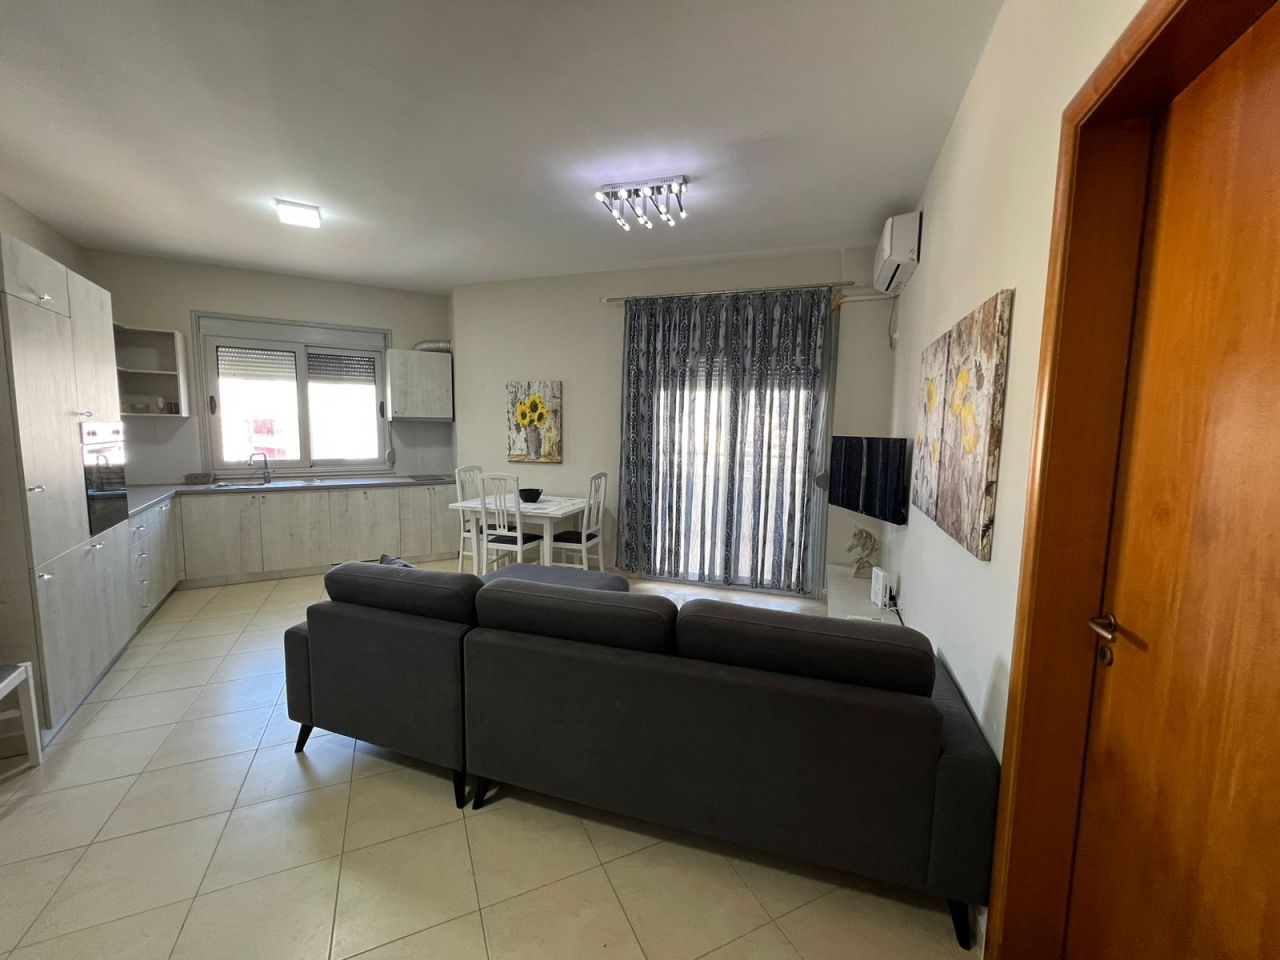 Apartment For Rent In Vlora Albania, Located In A Quiet Area, Close To The City Center